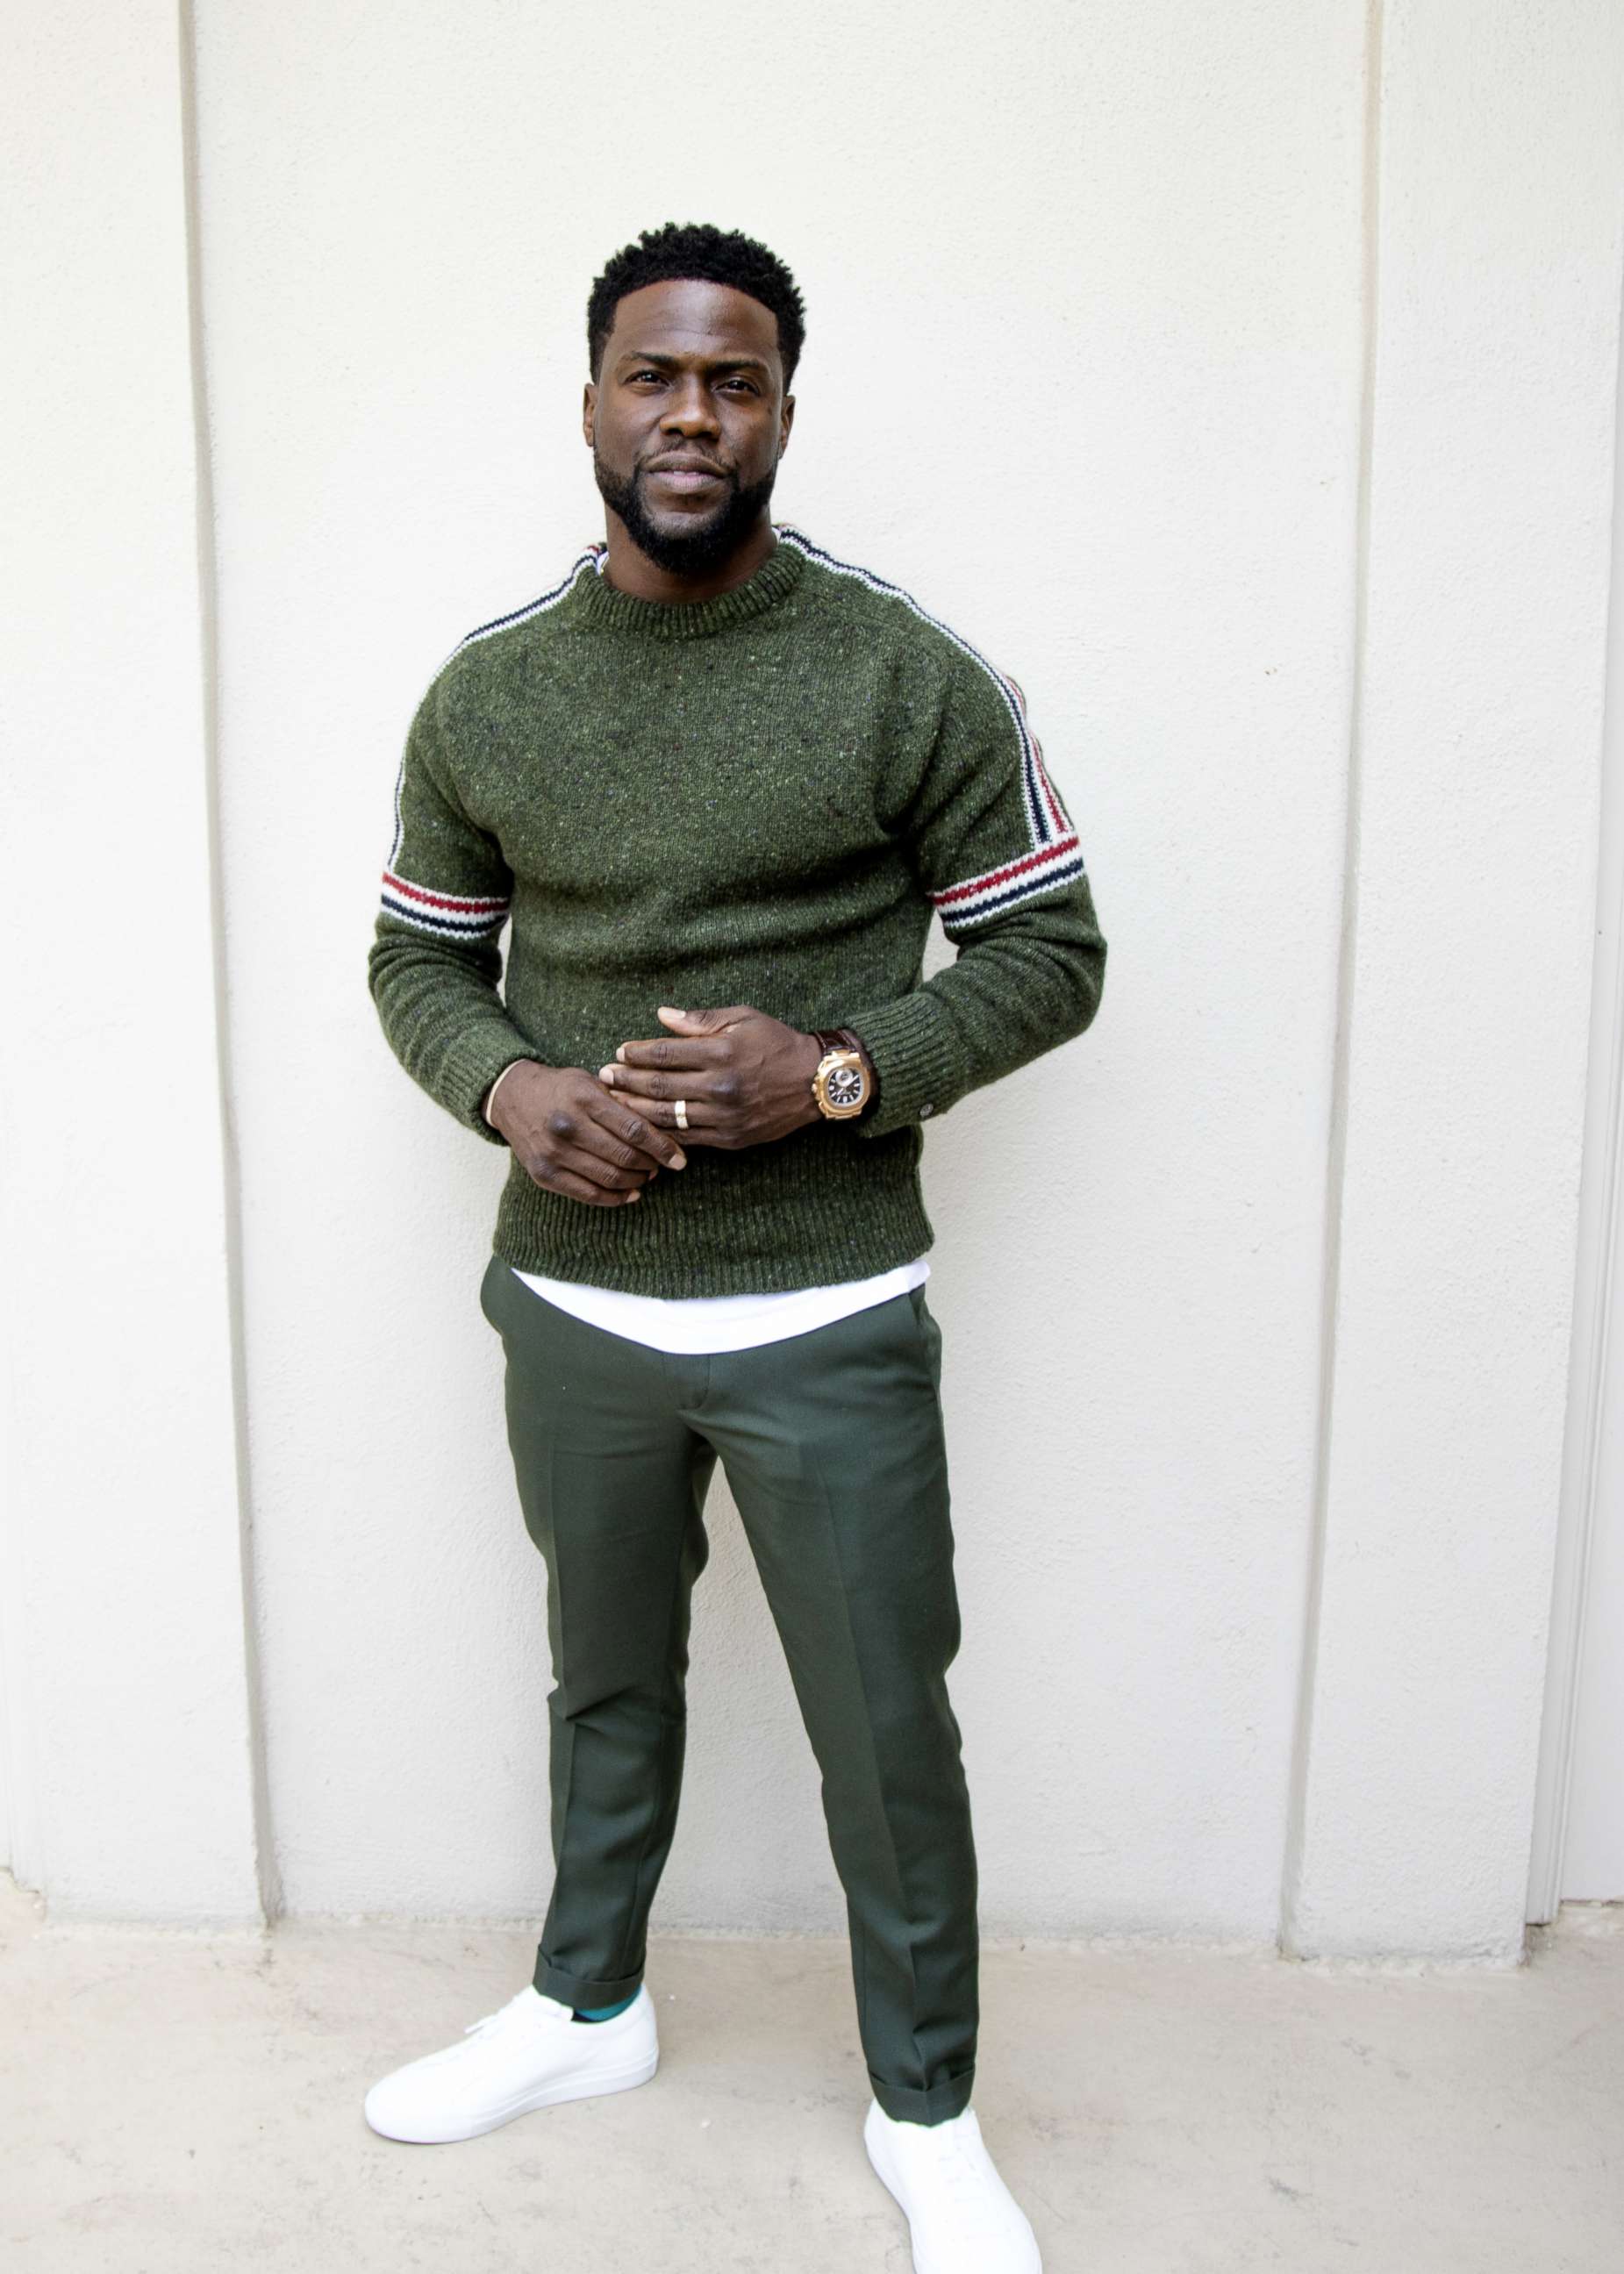 Kevin Hart promotes the movie "The Upside" in Hollywood, Oct. 30, 2018.